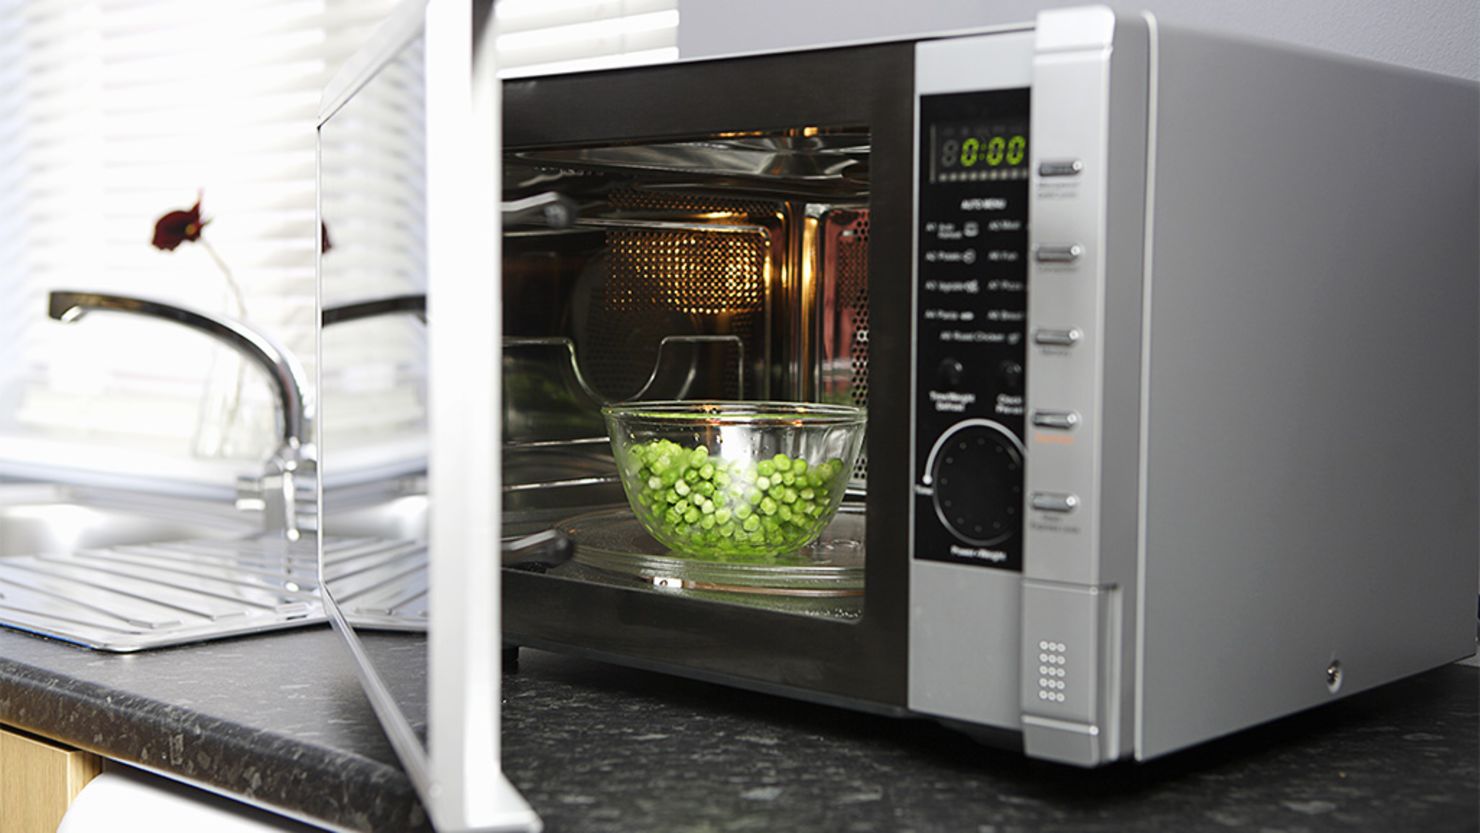 Does microwaving food remove its nutritional value?